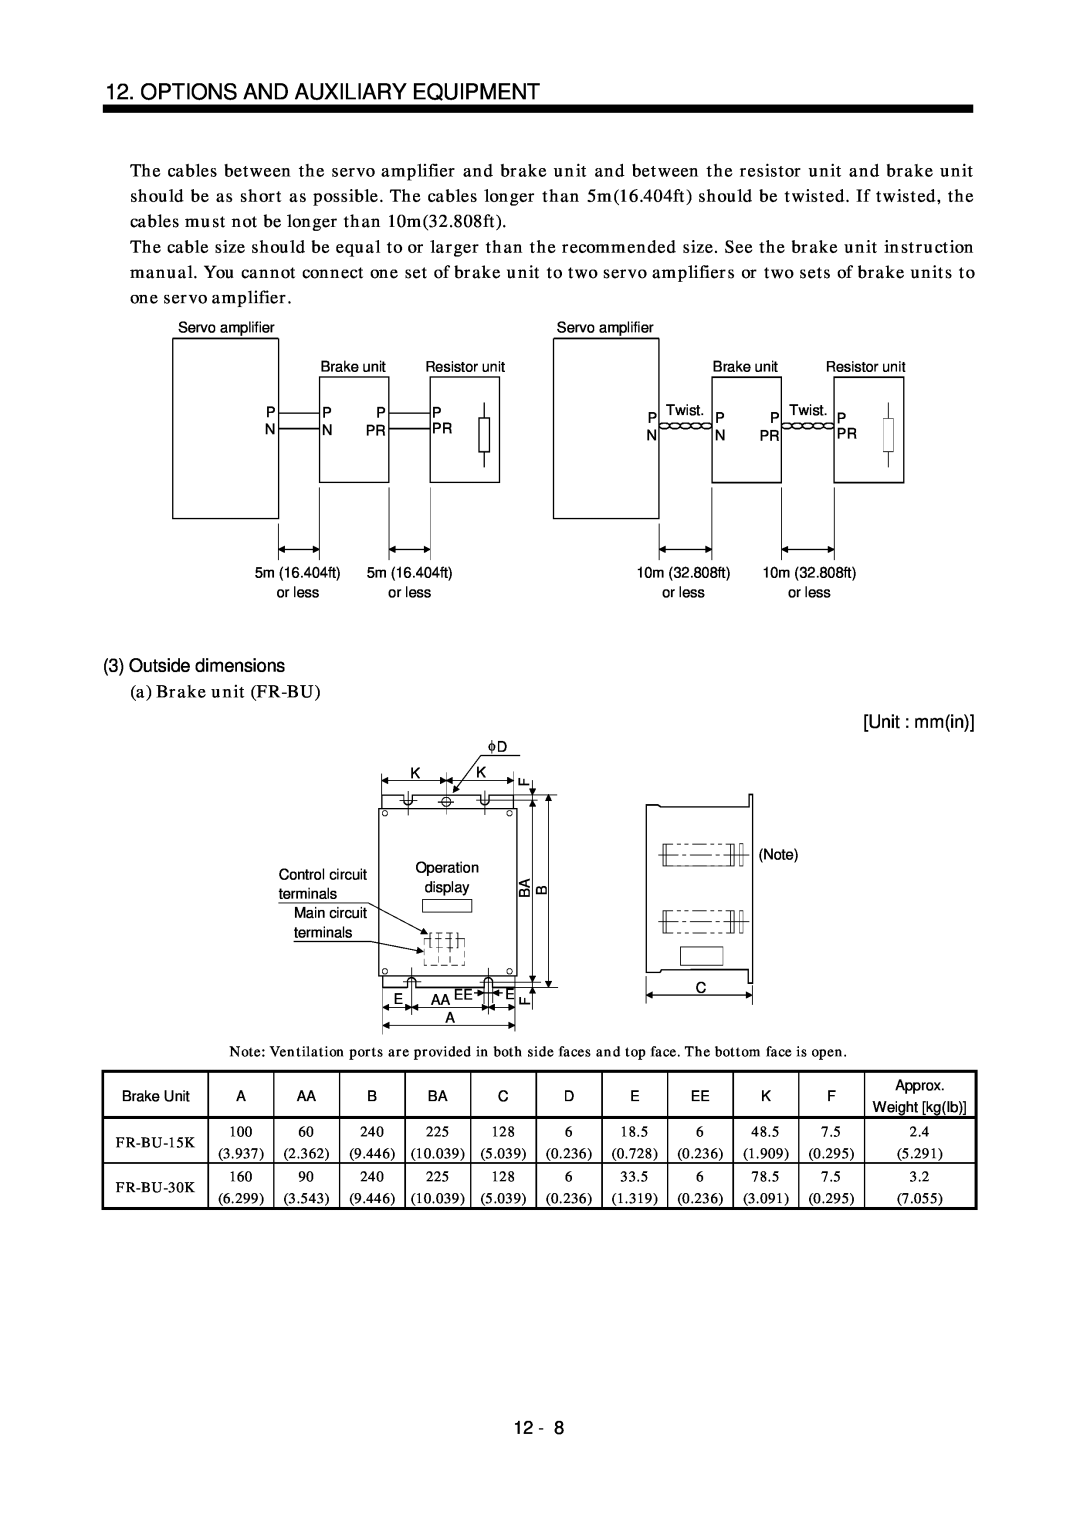 Bose MR-J2S- B instruction manual 3Outside dimensions, Unit : mmin, Options And Auxiliary Equipment 